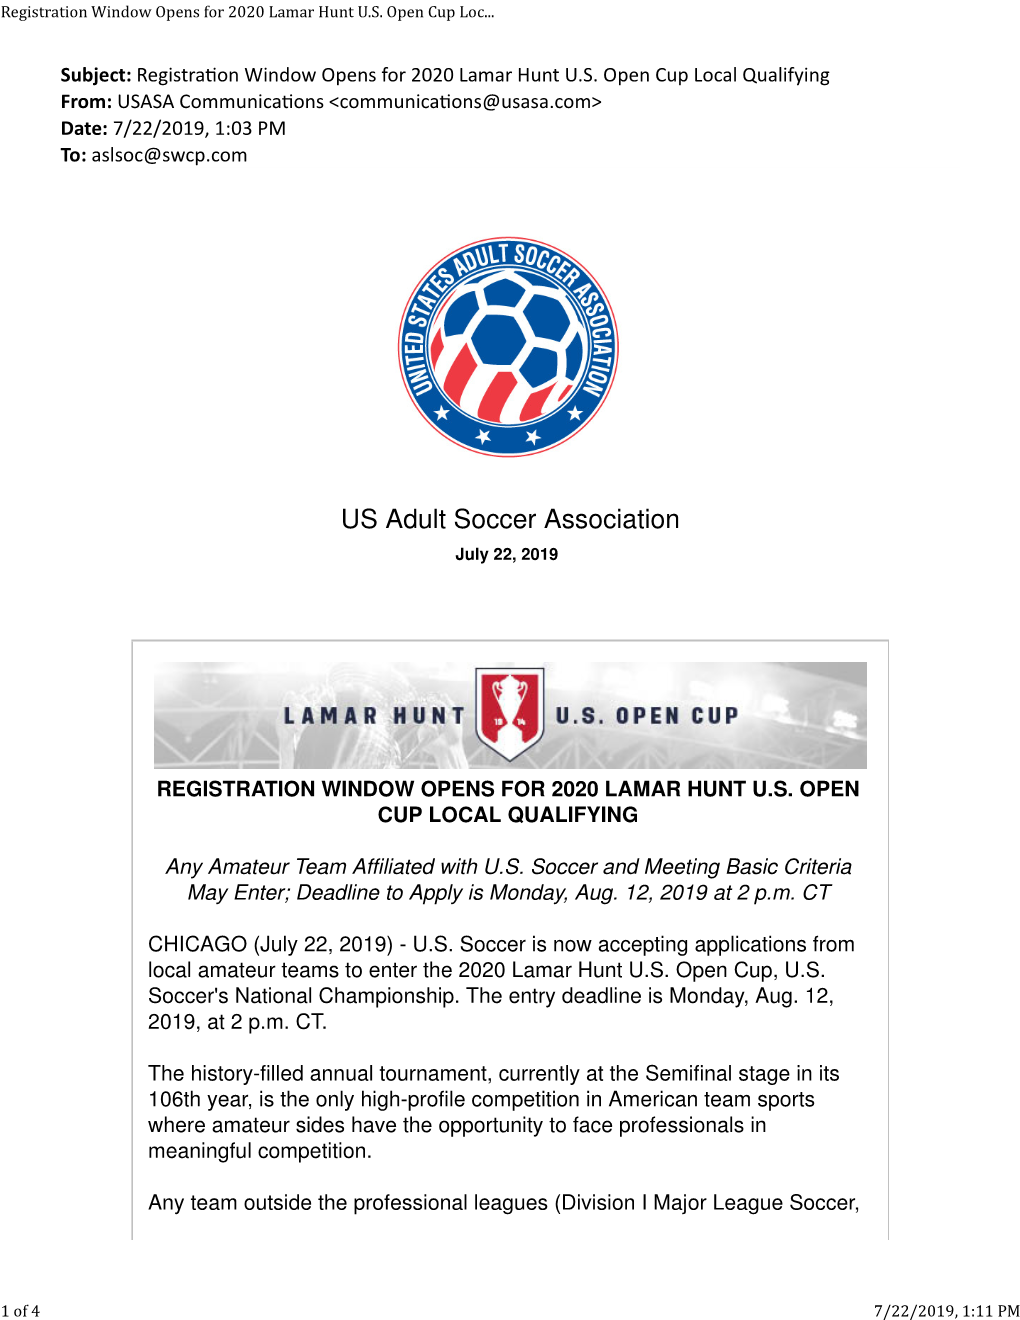 Registration Window Opens for 2020 Lamar Hunt U.S. Open Cup Local Qualifying